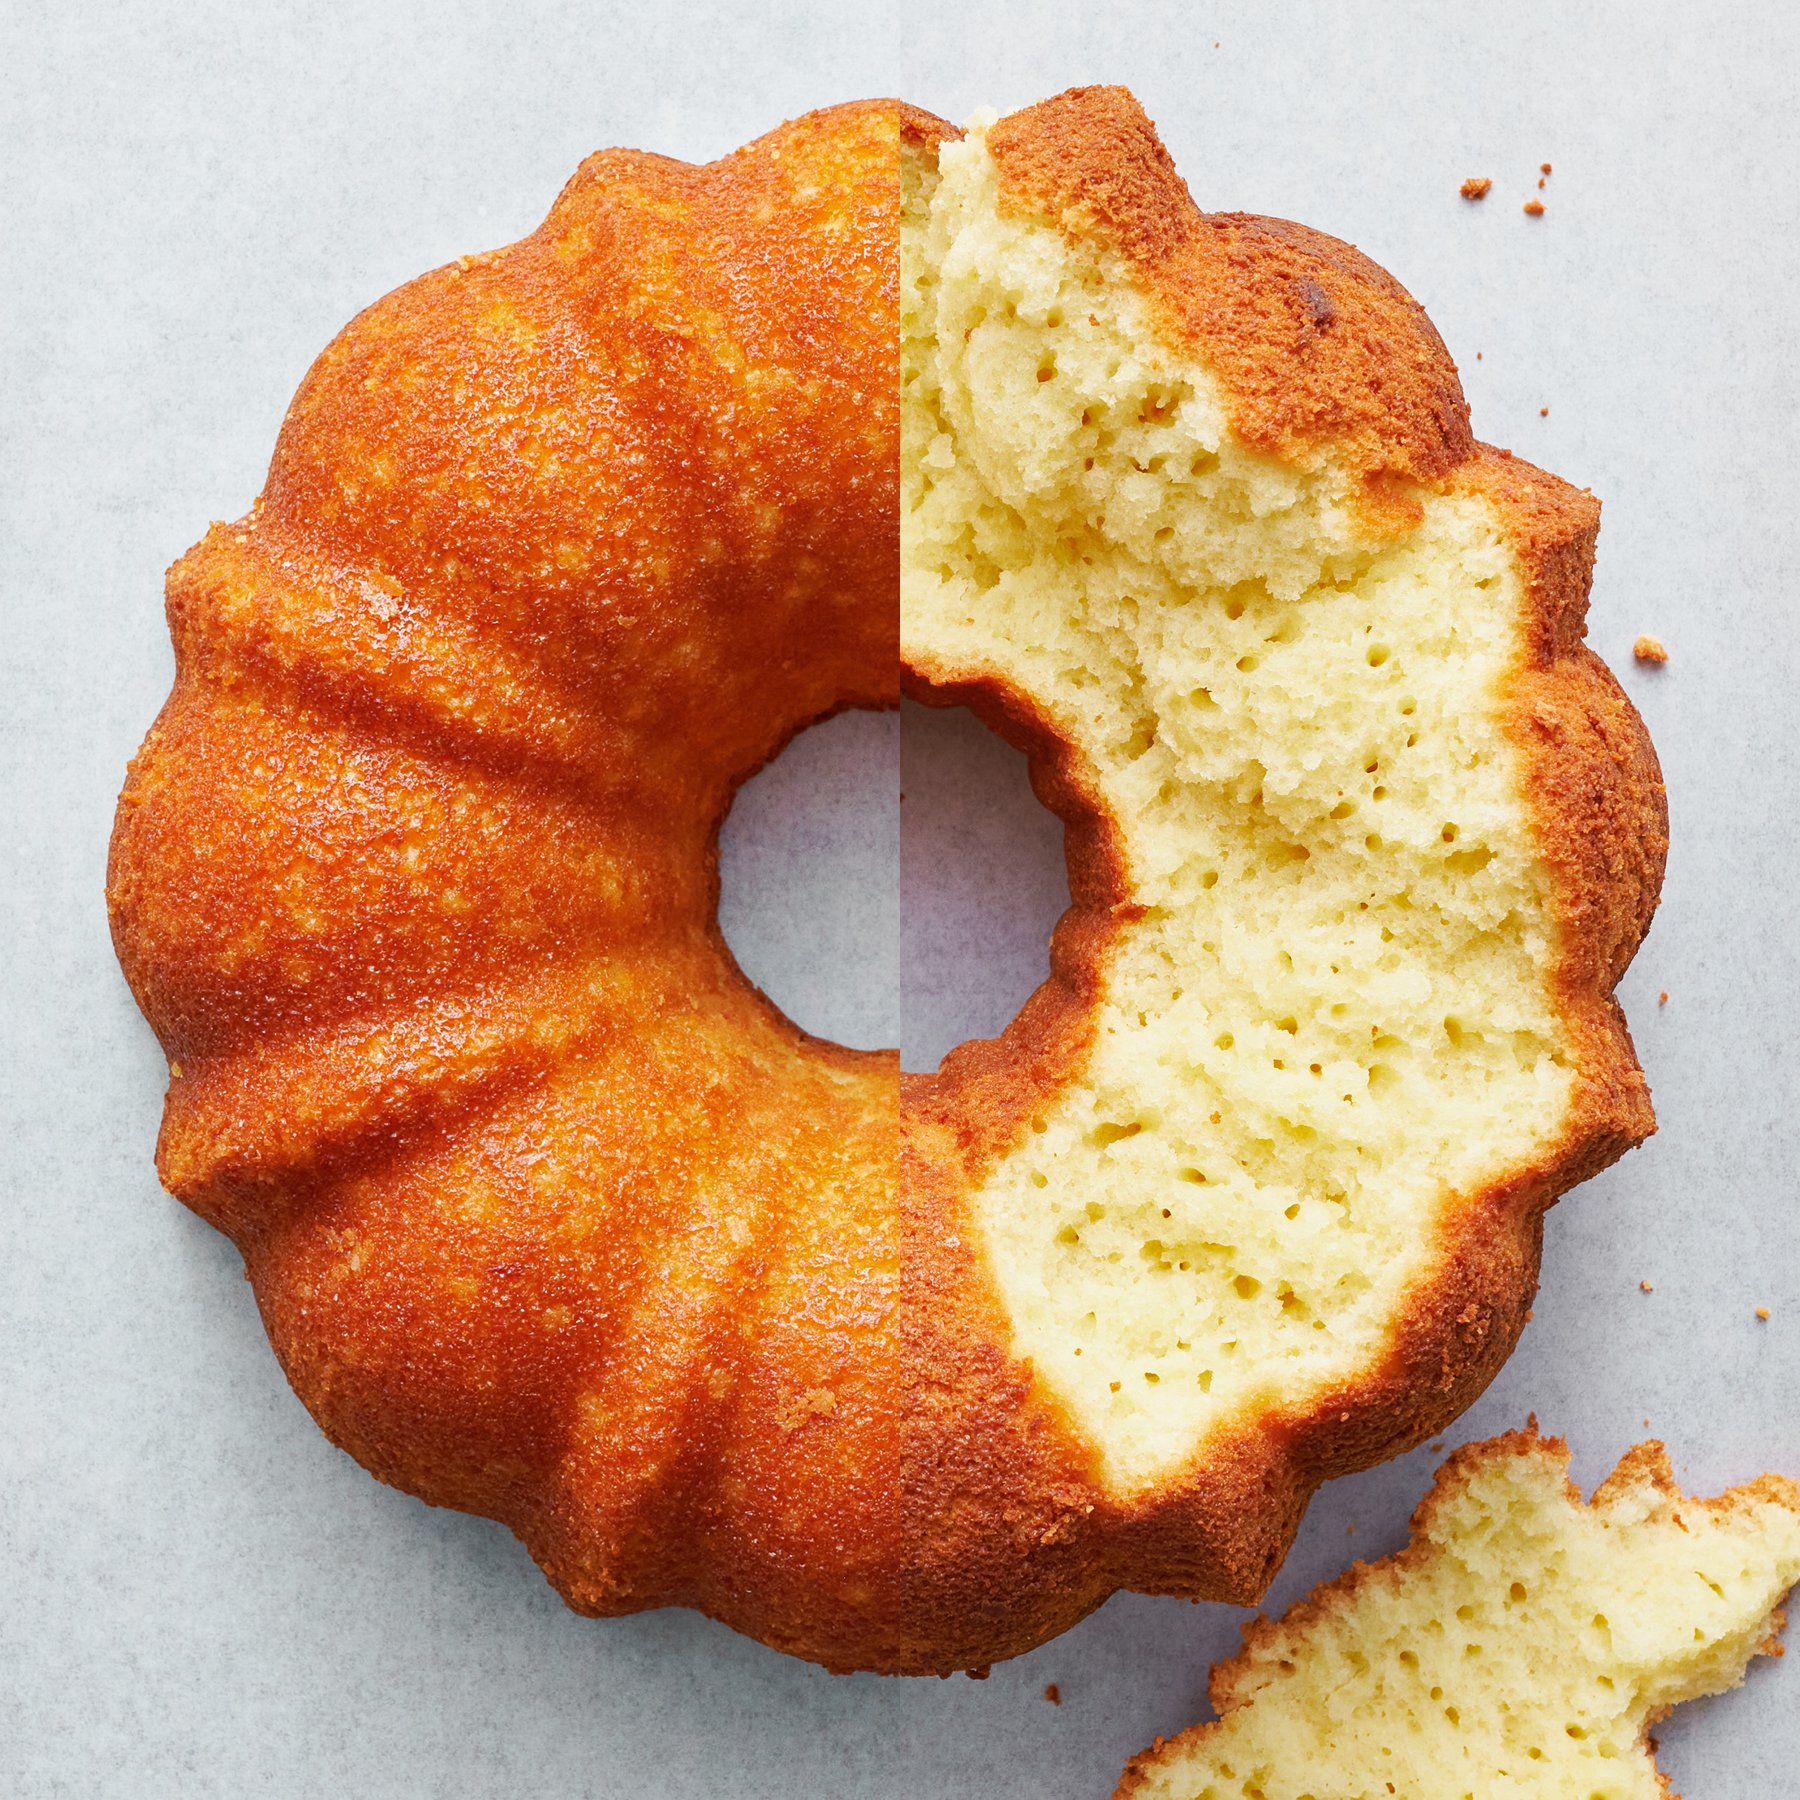 How to Prevent Bundt Cake from Sticking